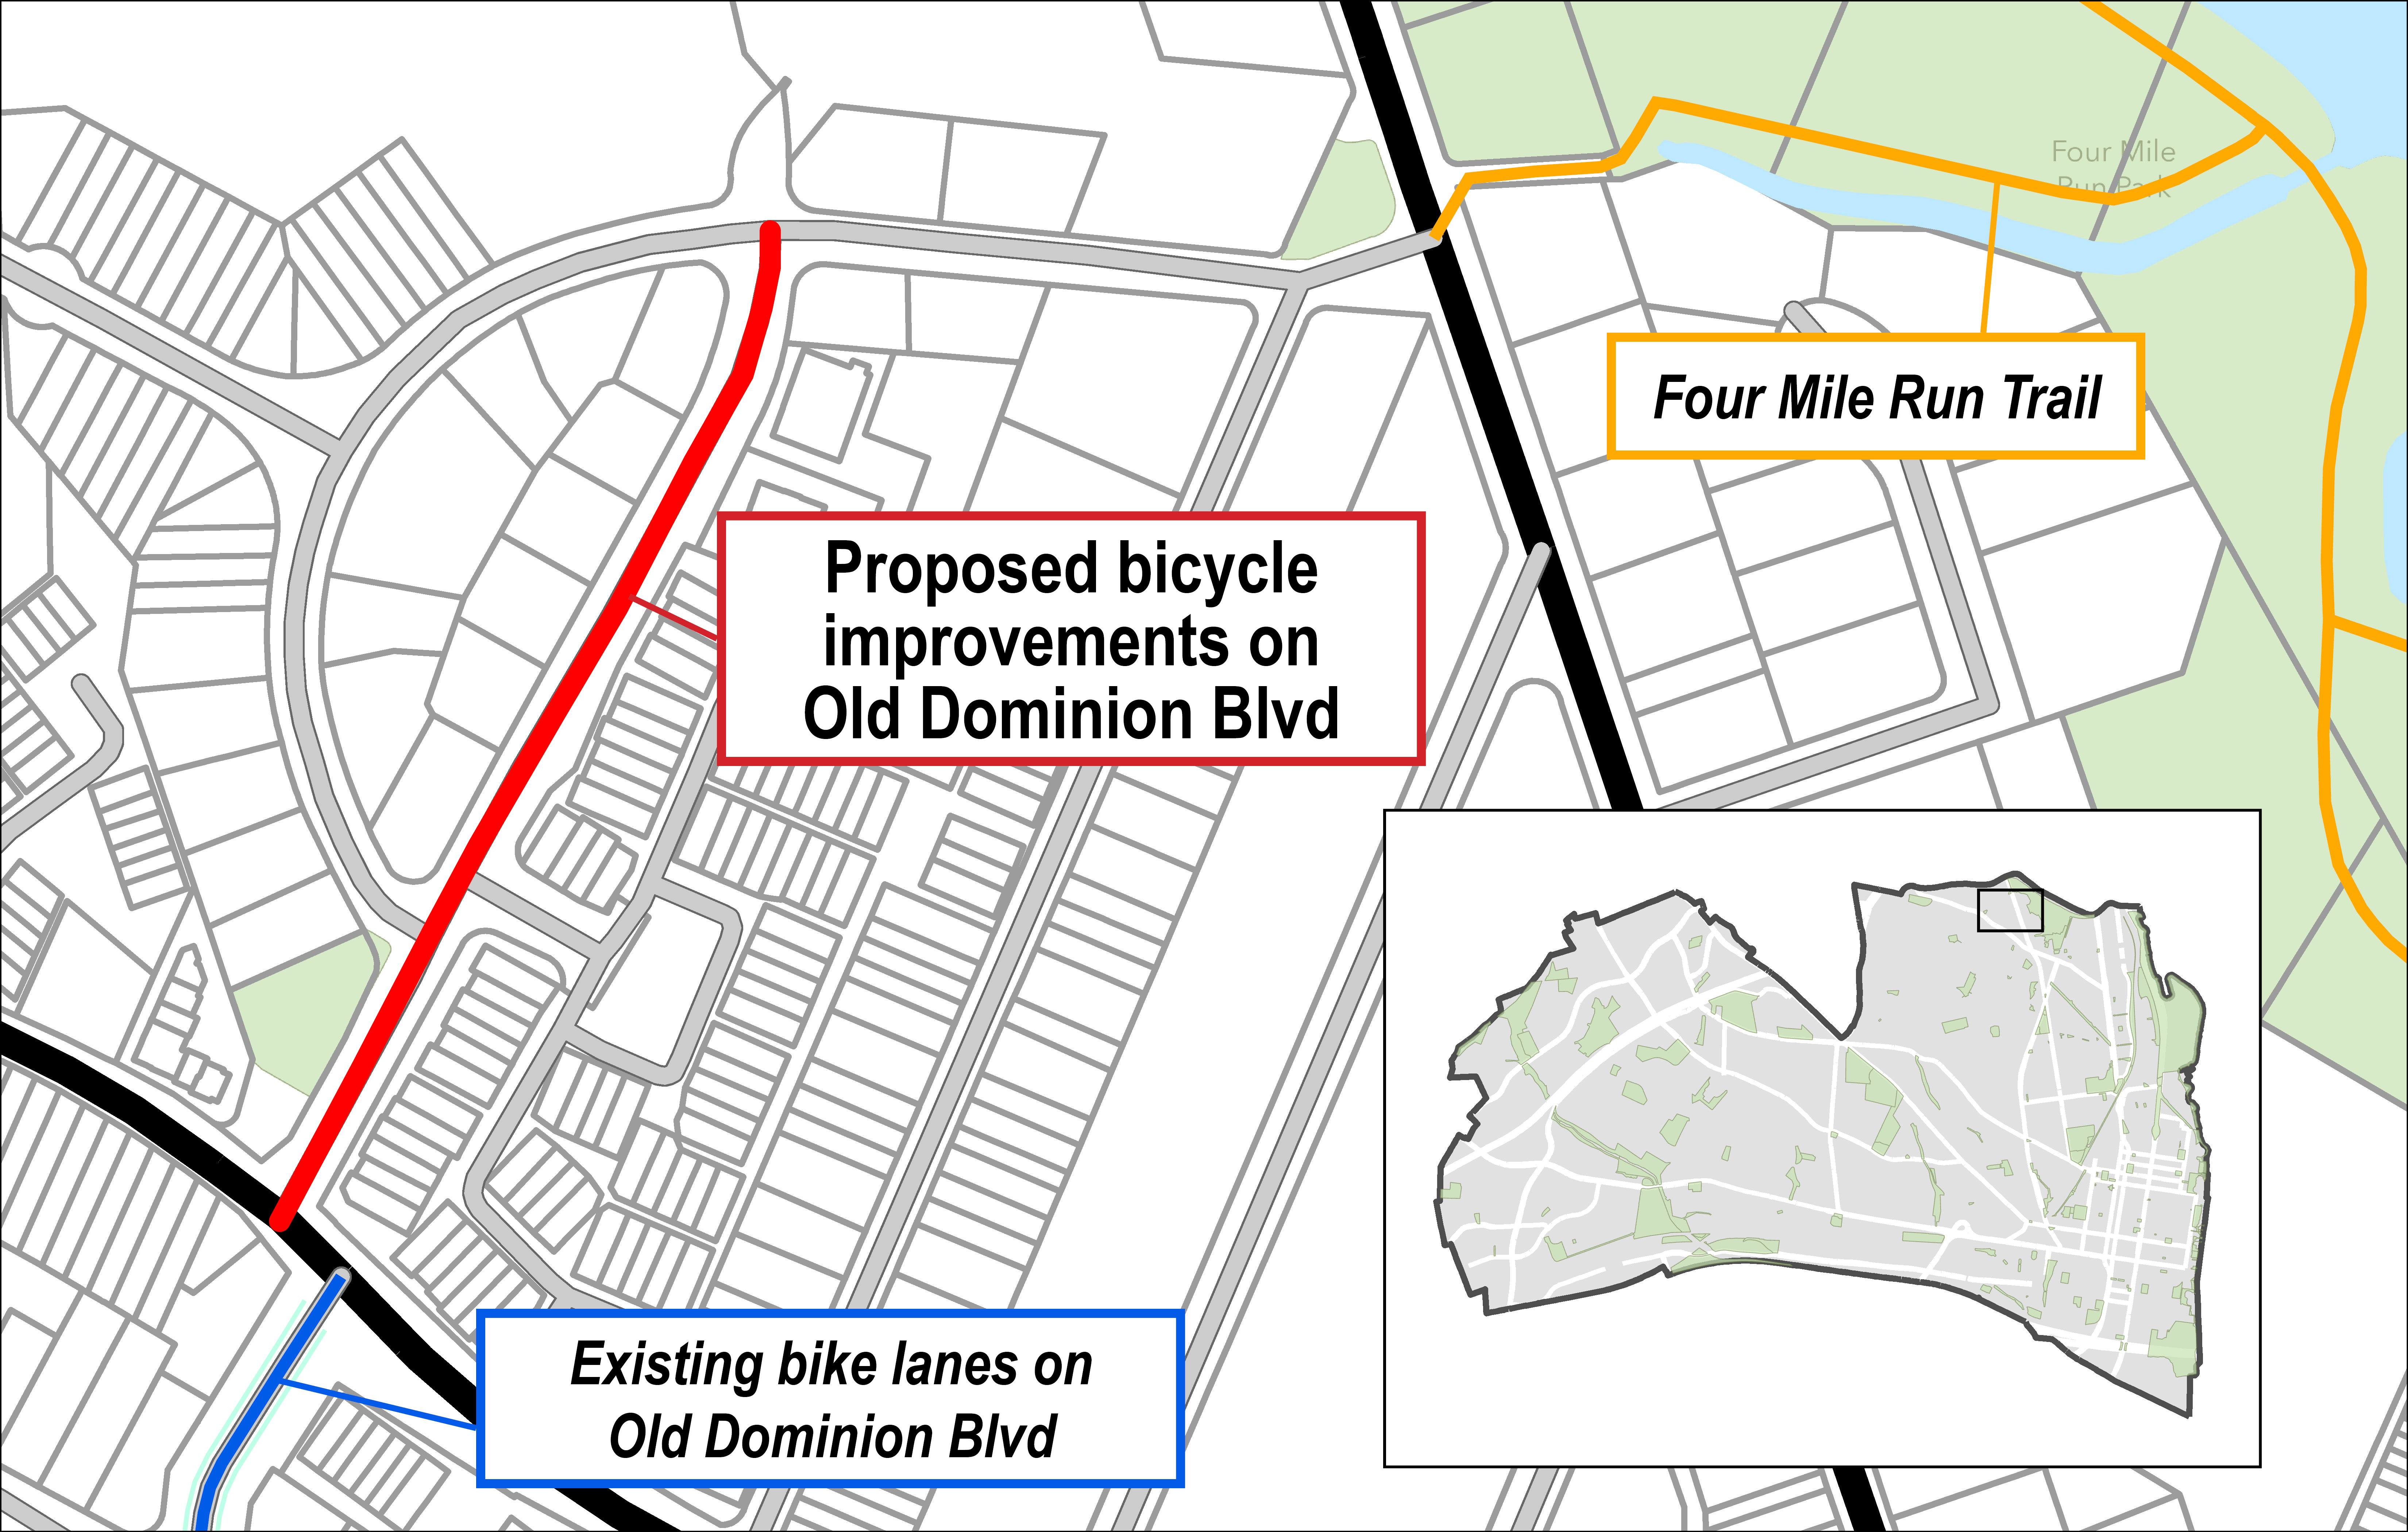 Map shows the location of proposed bike improvements on Old Dominion Boulevard in relation to existing bike lanes and the Four Mile Run Trail.